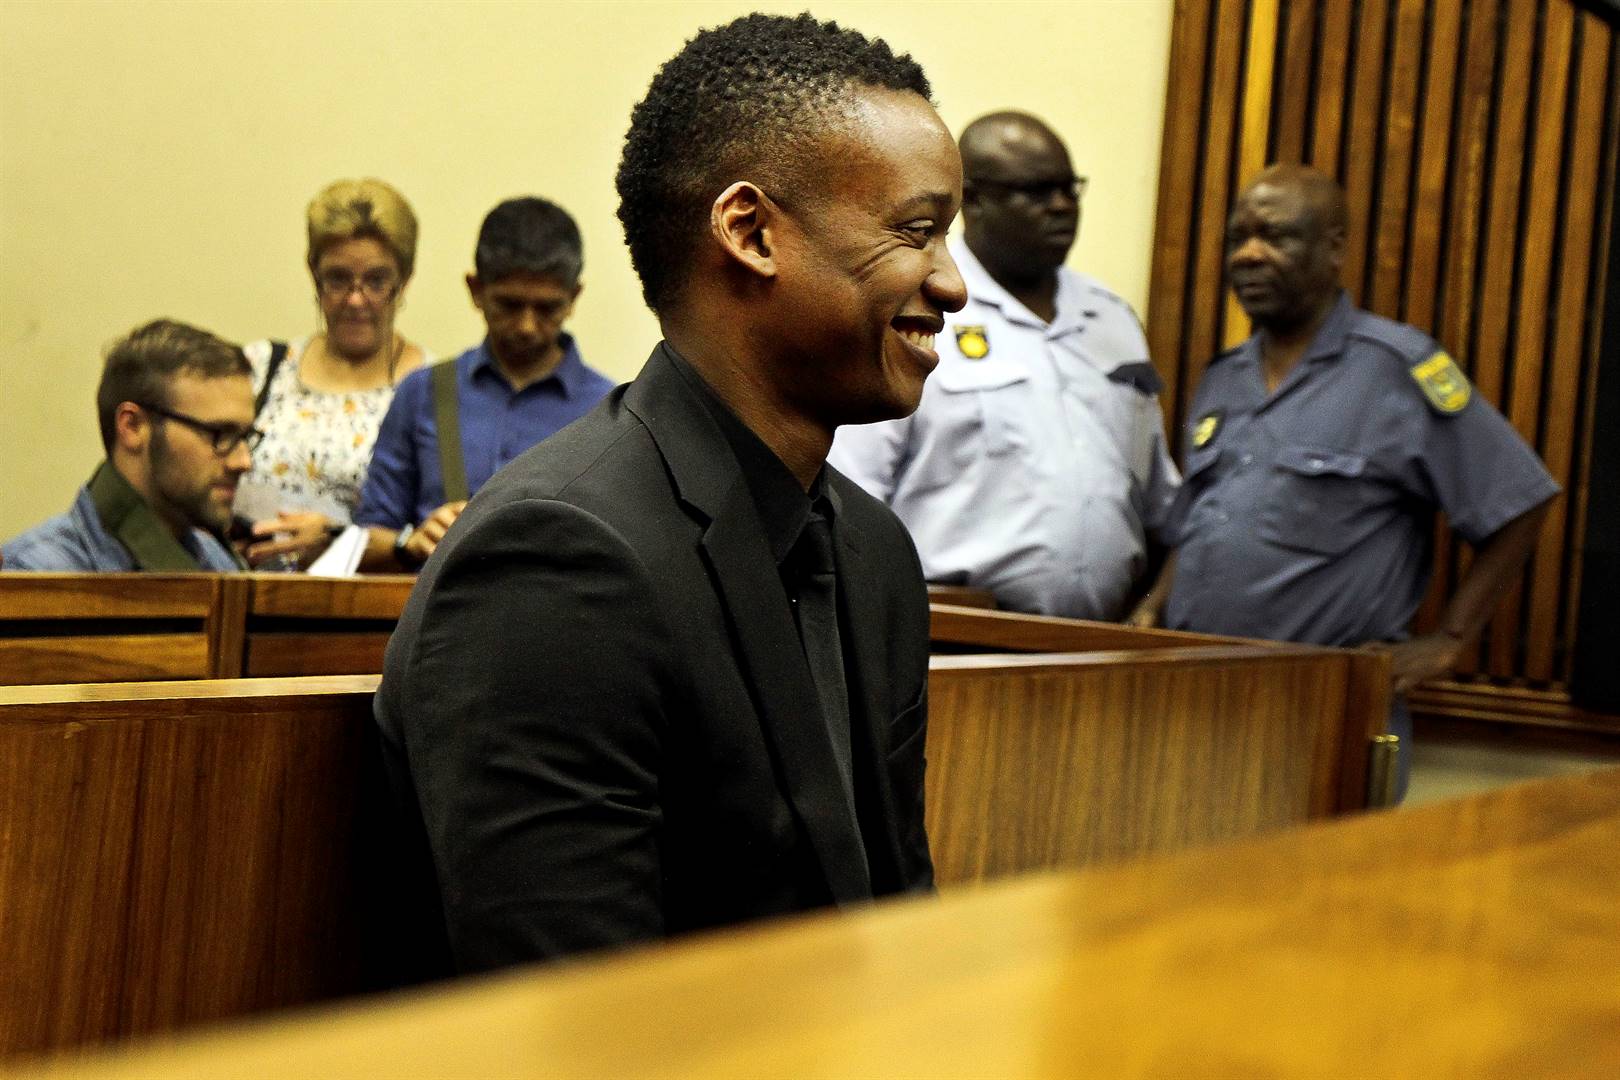 Duduzane Zuma is pictured at the Randburg Magistrates court for his trial. Duduzane is facing charges of culpable homicide and negligent driving. Picture: Rosetta Msimango/City Press